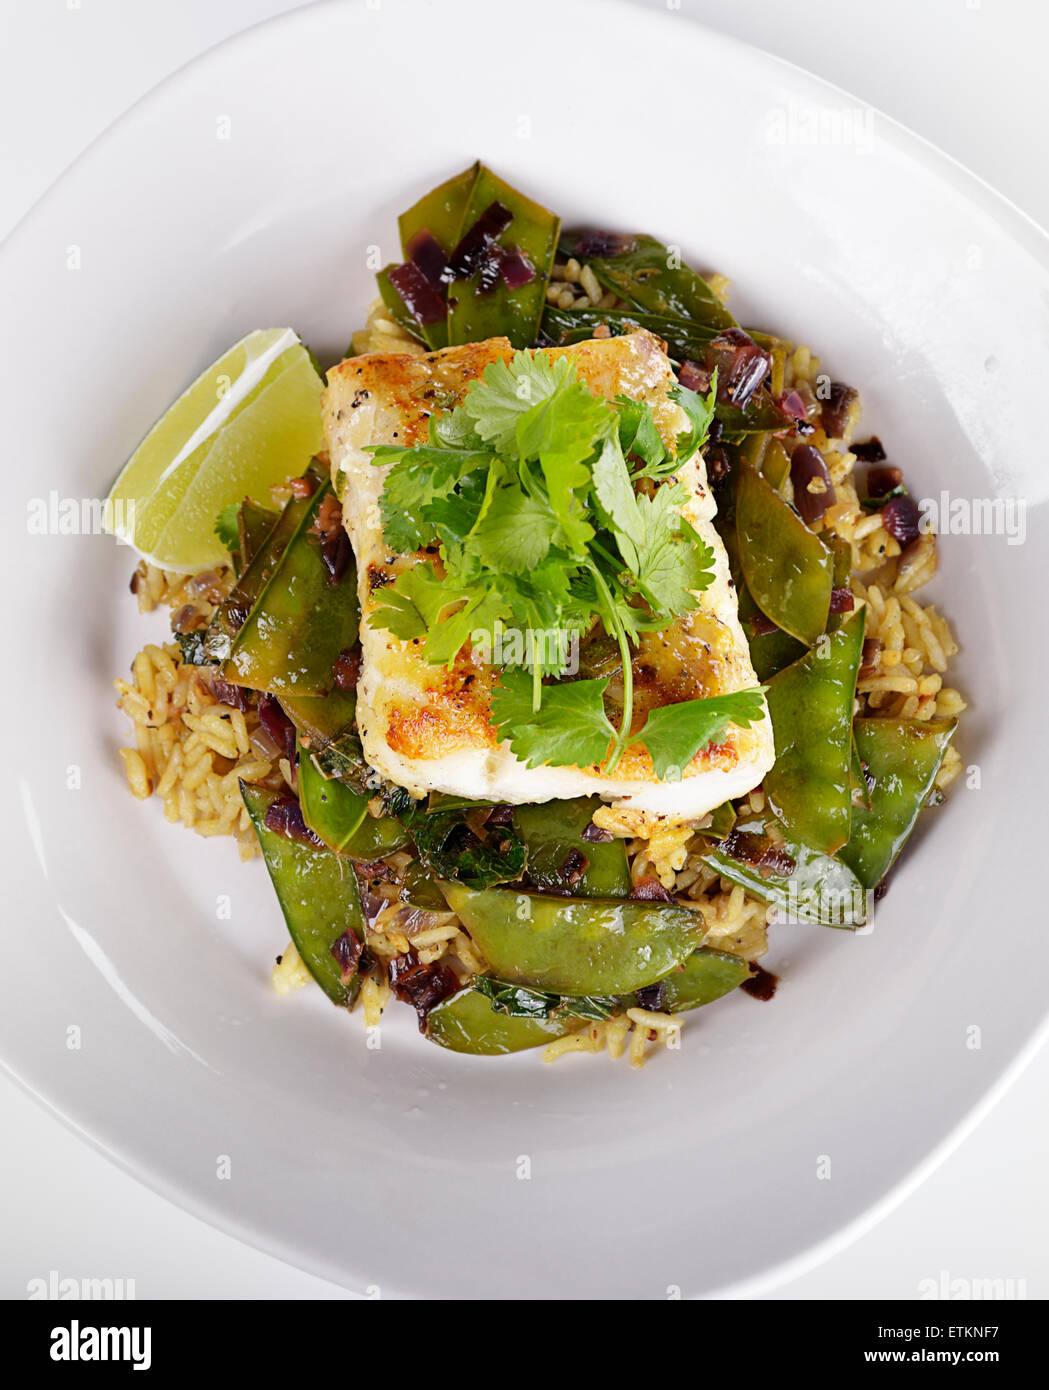 Cod Fish Fillets With Rice and Peas Stock Photo